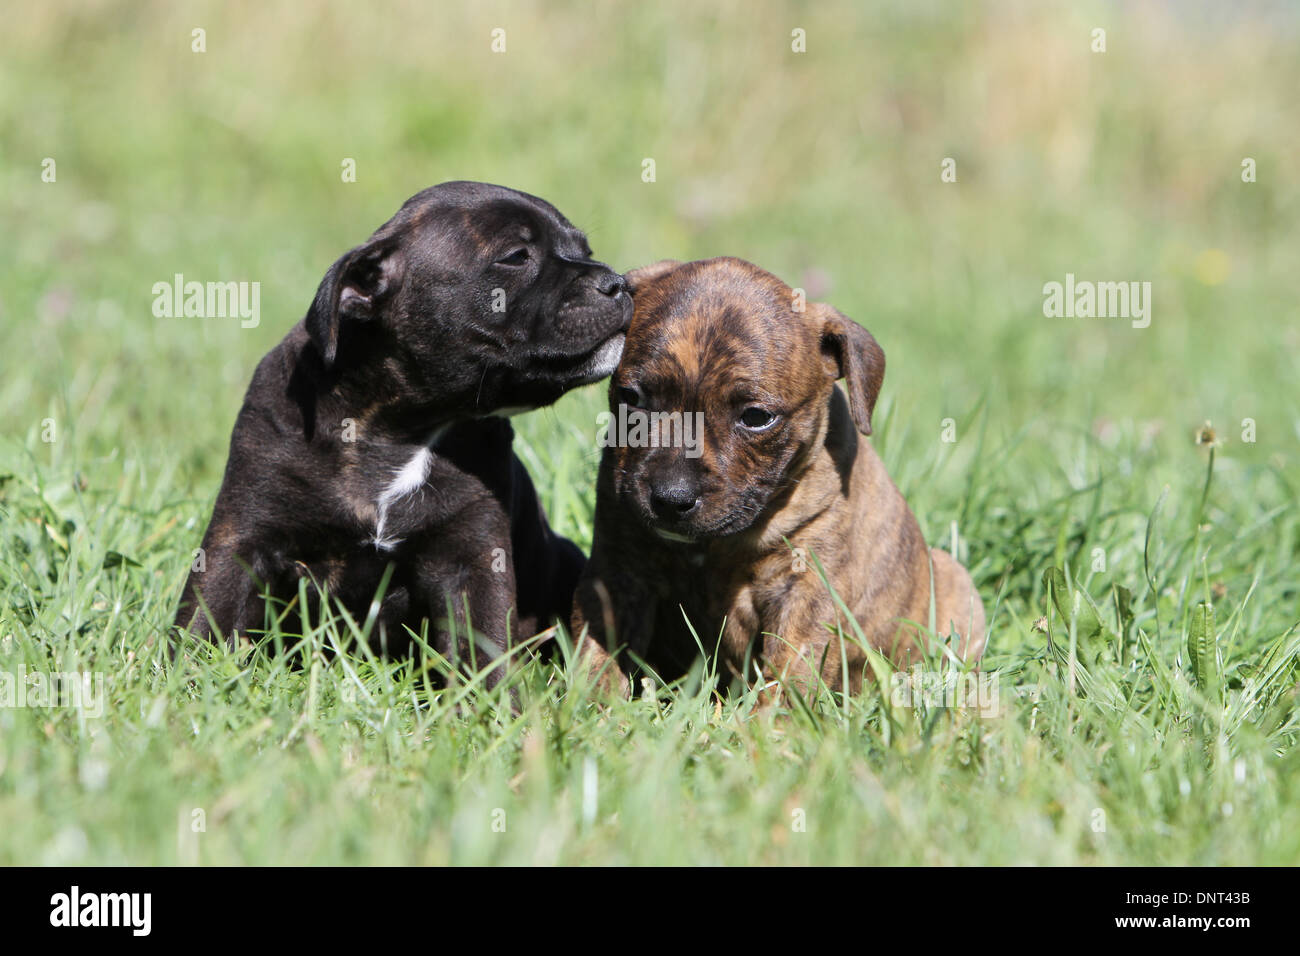 dog Staffordshire Bull Terrier / Staffie  two puppies sitting in a meadow Stock Photo